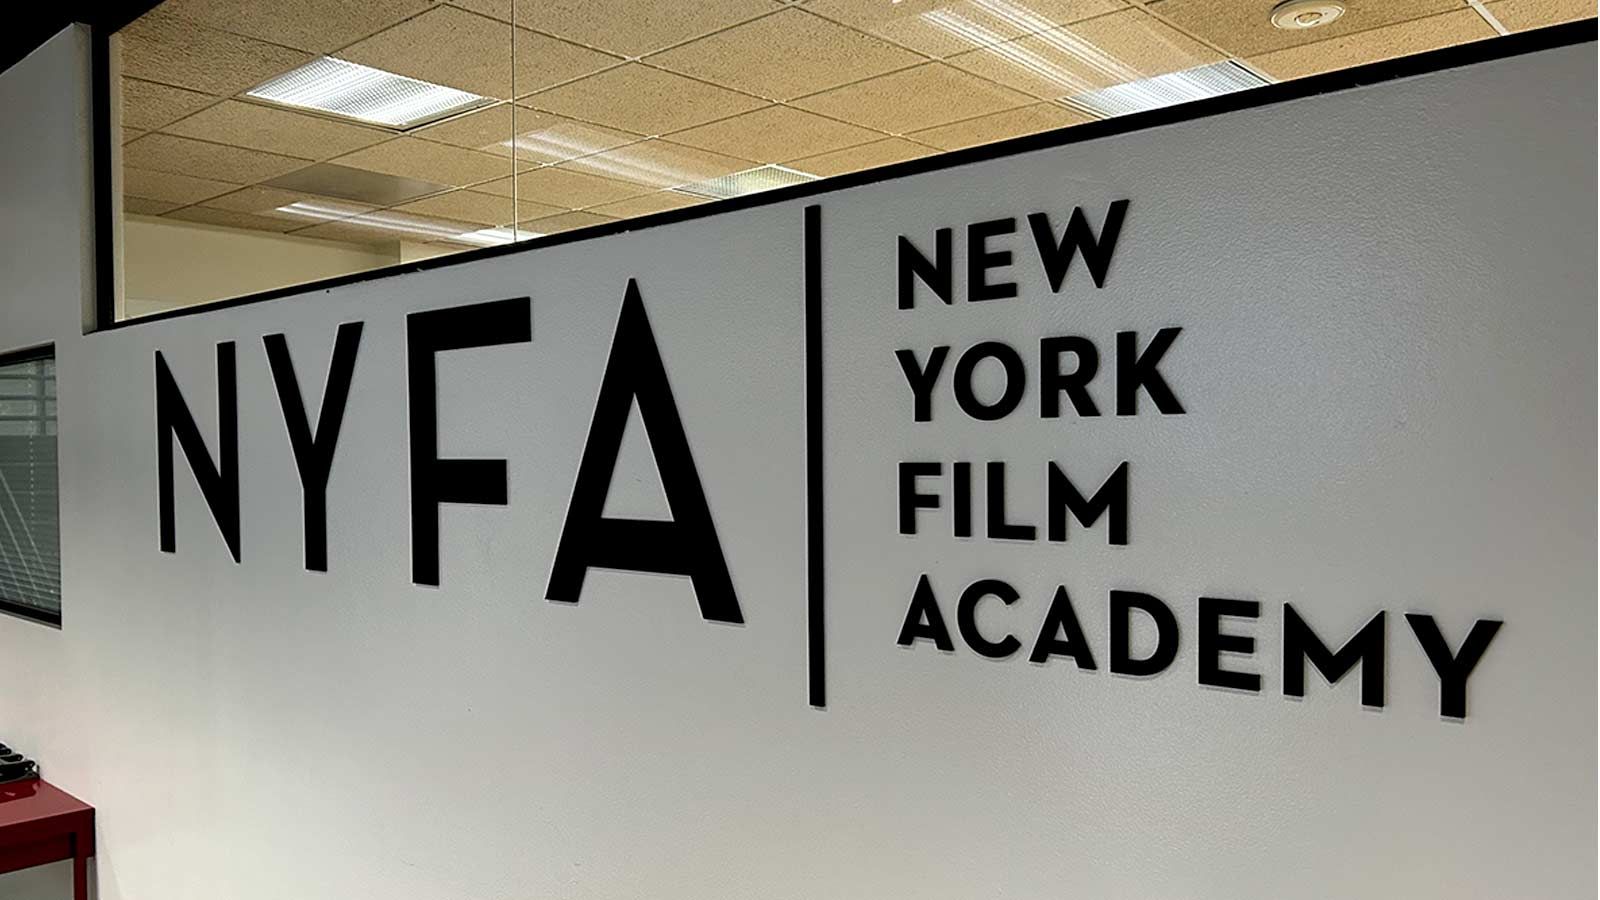 New York Film Academy acrylic sign attached to the wall